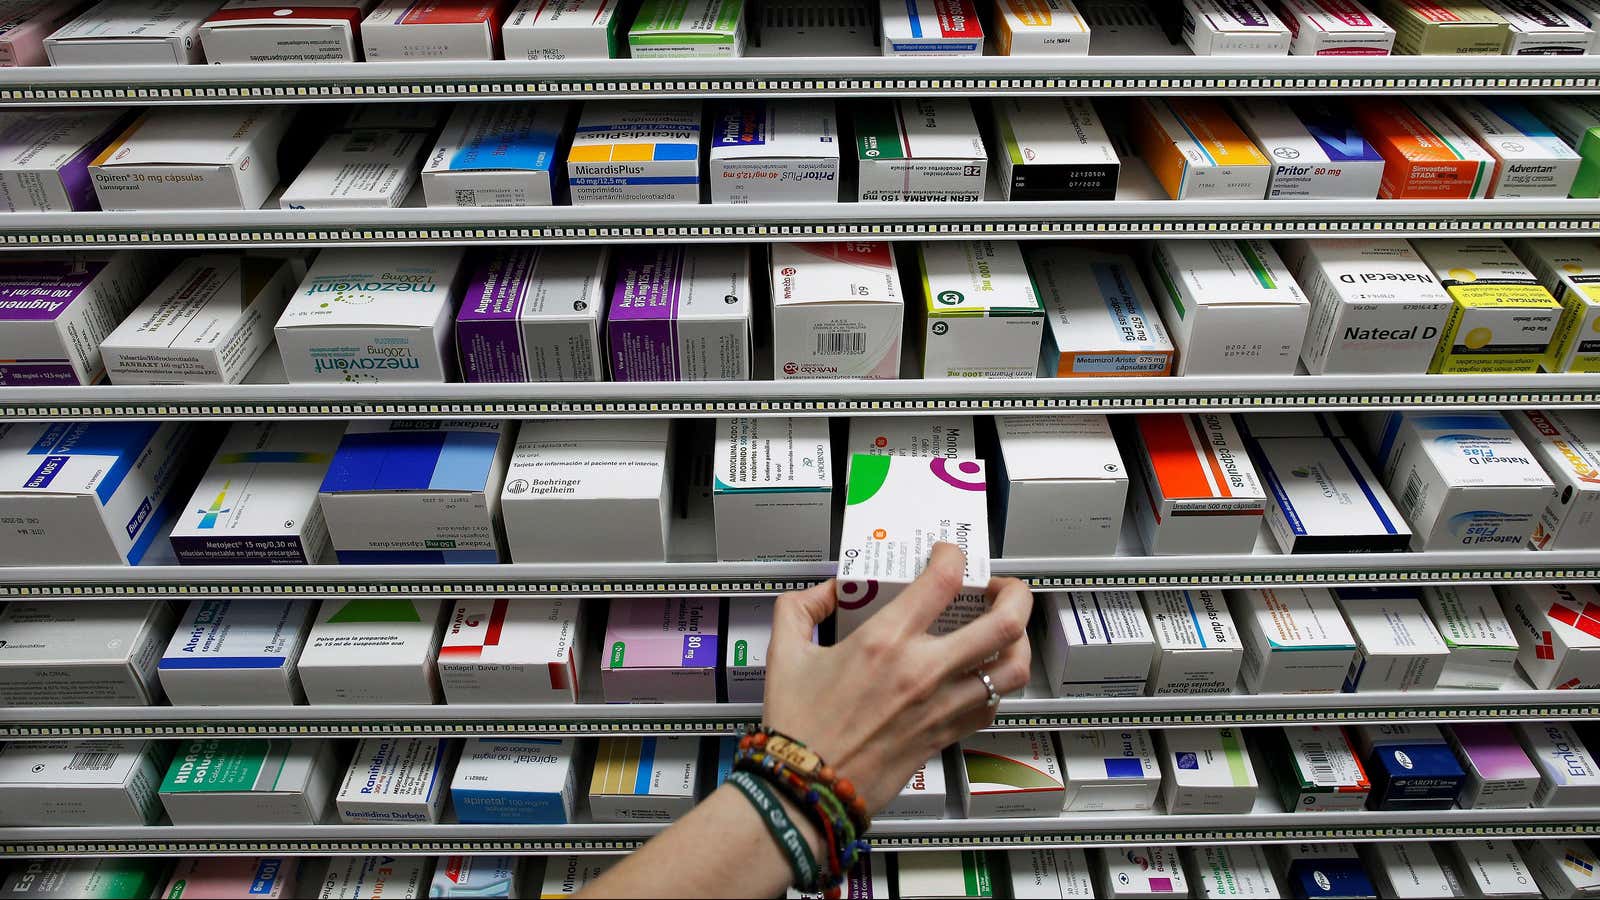 Amazon is coming for pharmacies with its PillPack acquisition.